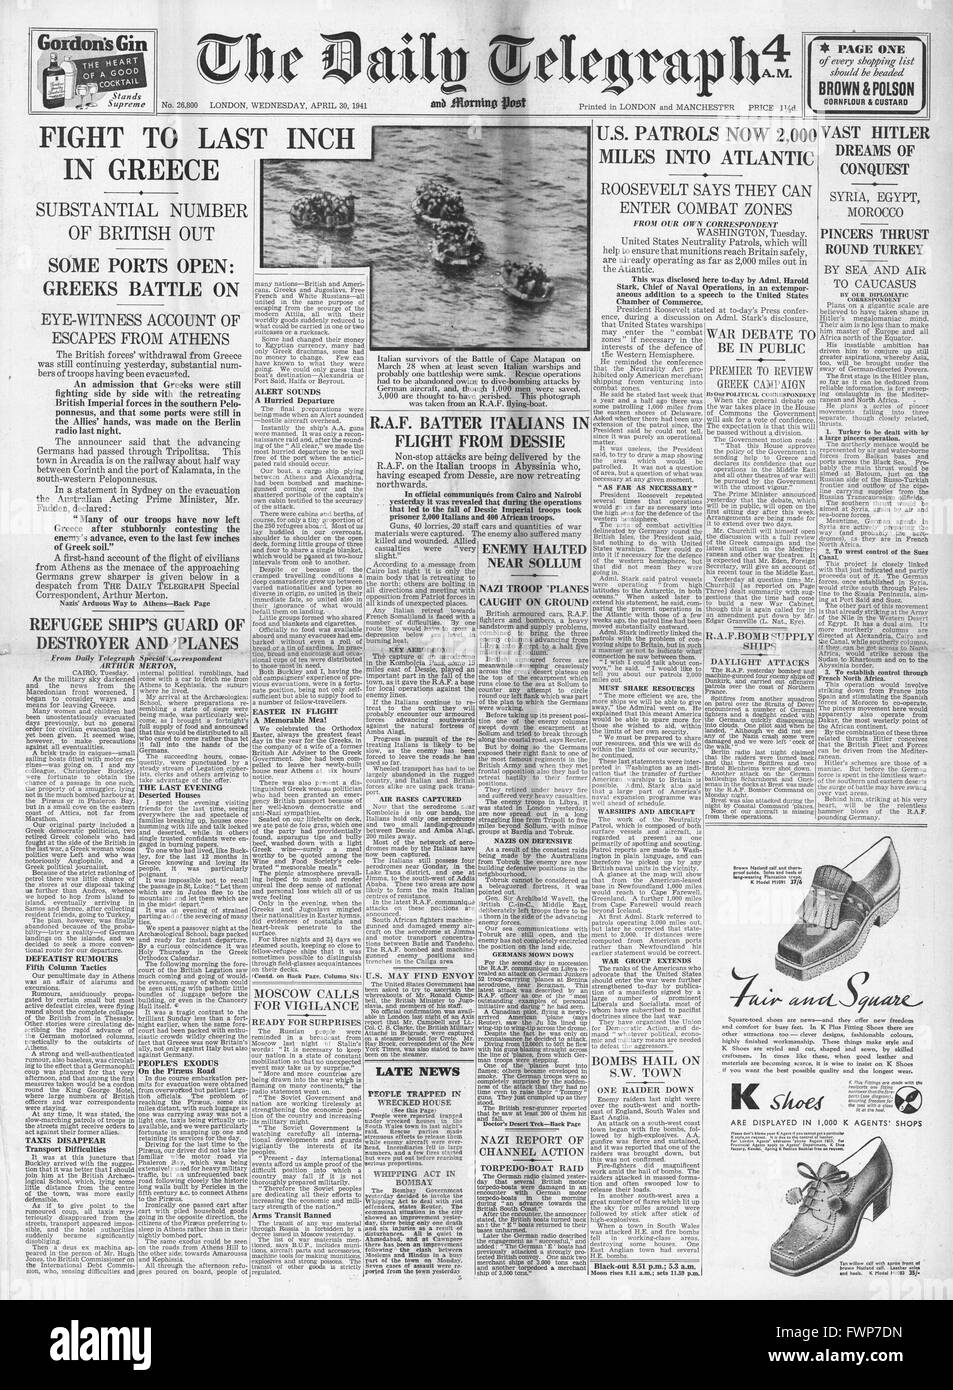 1941 front page  Daily Telegraph Allied Forces withdraw from Greece and U.S. Navy assist in Battle of Atlantic Stock Photo